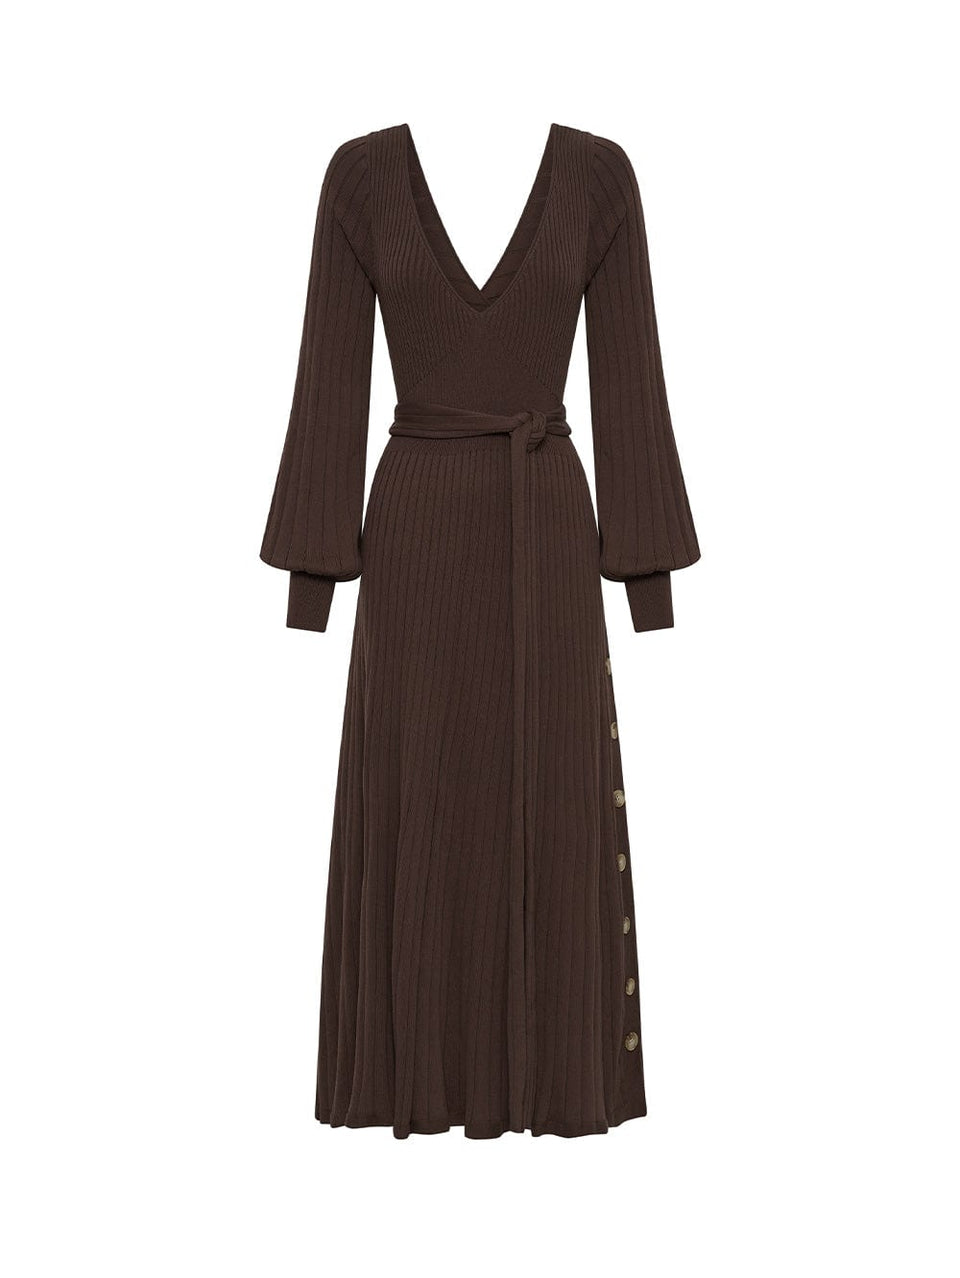 Ghost image of the KIVARI Yolanda Long Sleeve Knit Dress - Chocolate: A rich brown reversible dress made from rib knit stitching with soft underbust seams, a tie-back feature with cut-out detail, full-length blouson sleeves and an A-line skirt.